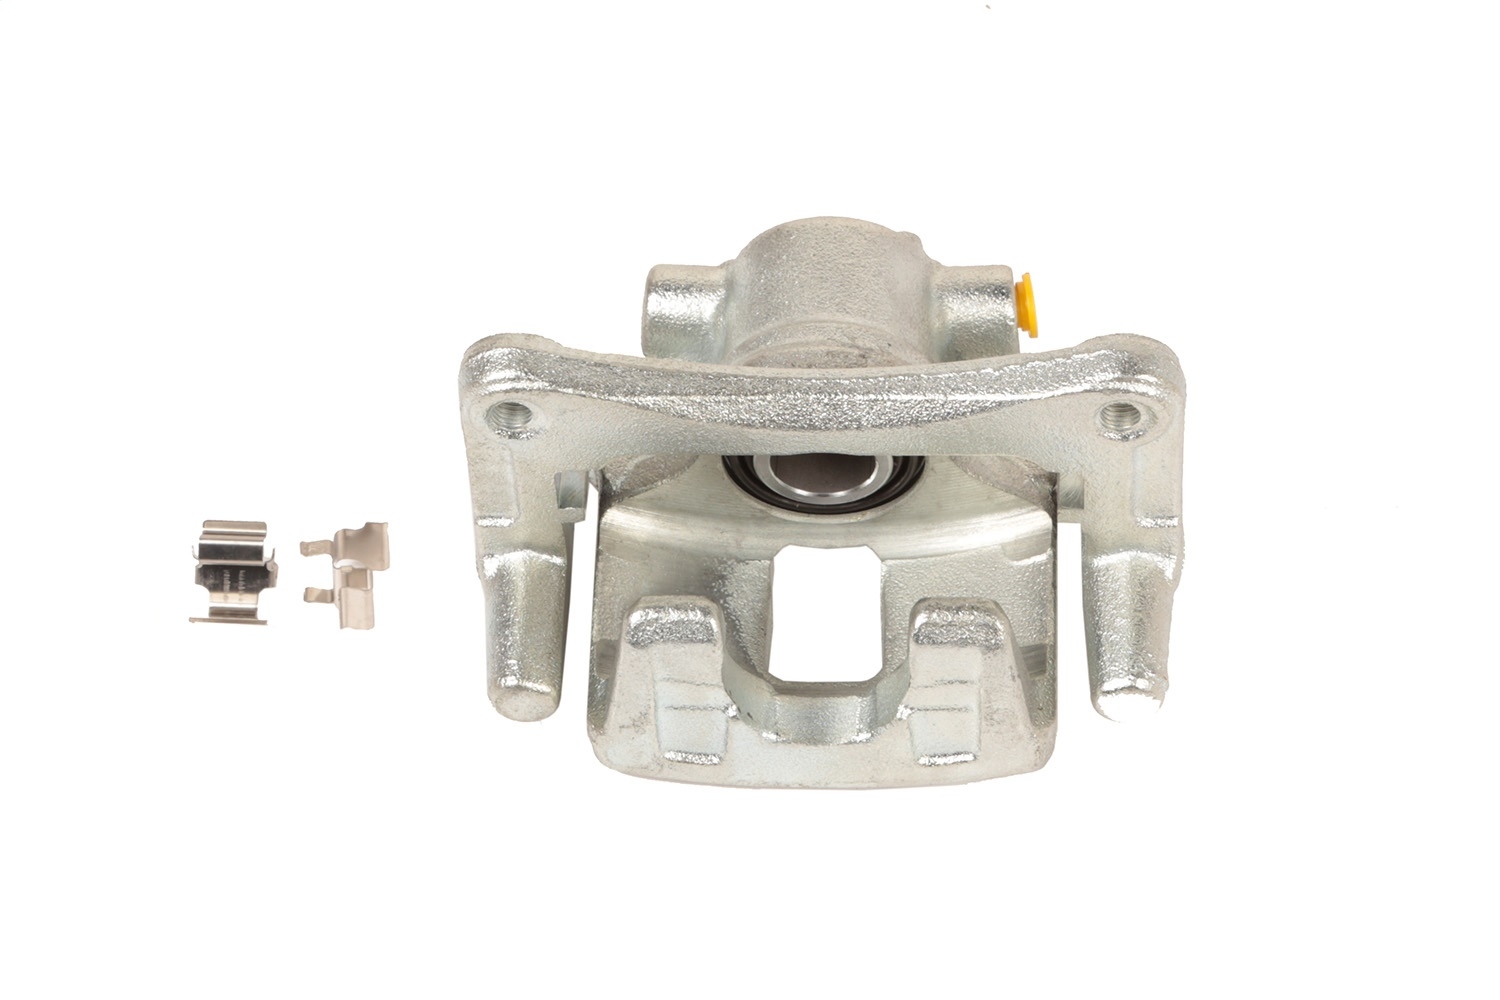 Omix This Rear Left Brake Caliper From Omix Fits 07-16 Jeep Compass And Patriot Mk. Caliper Casting